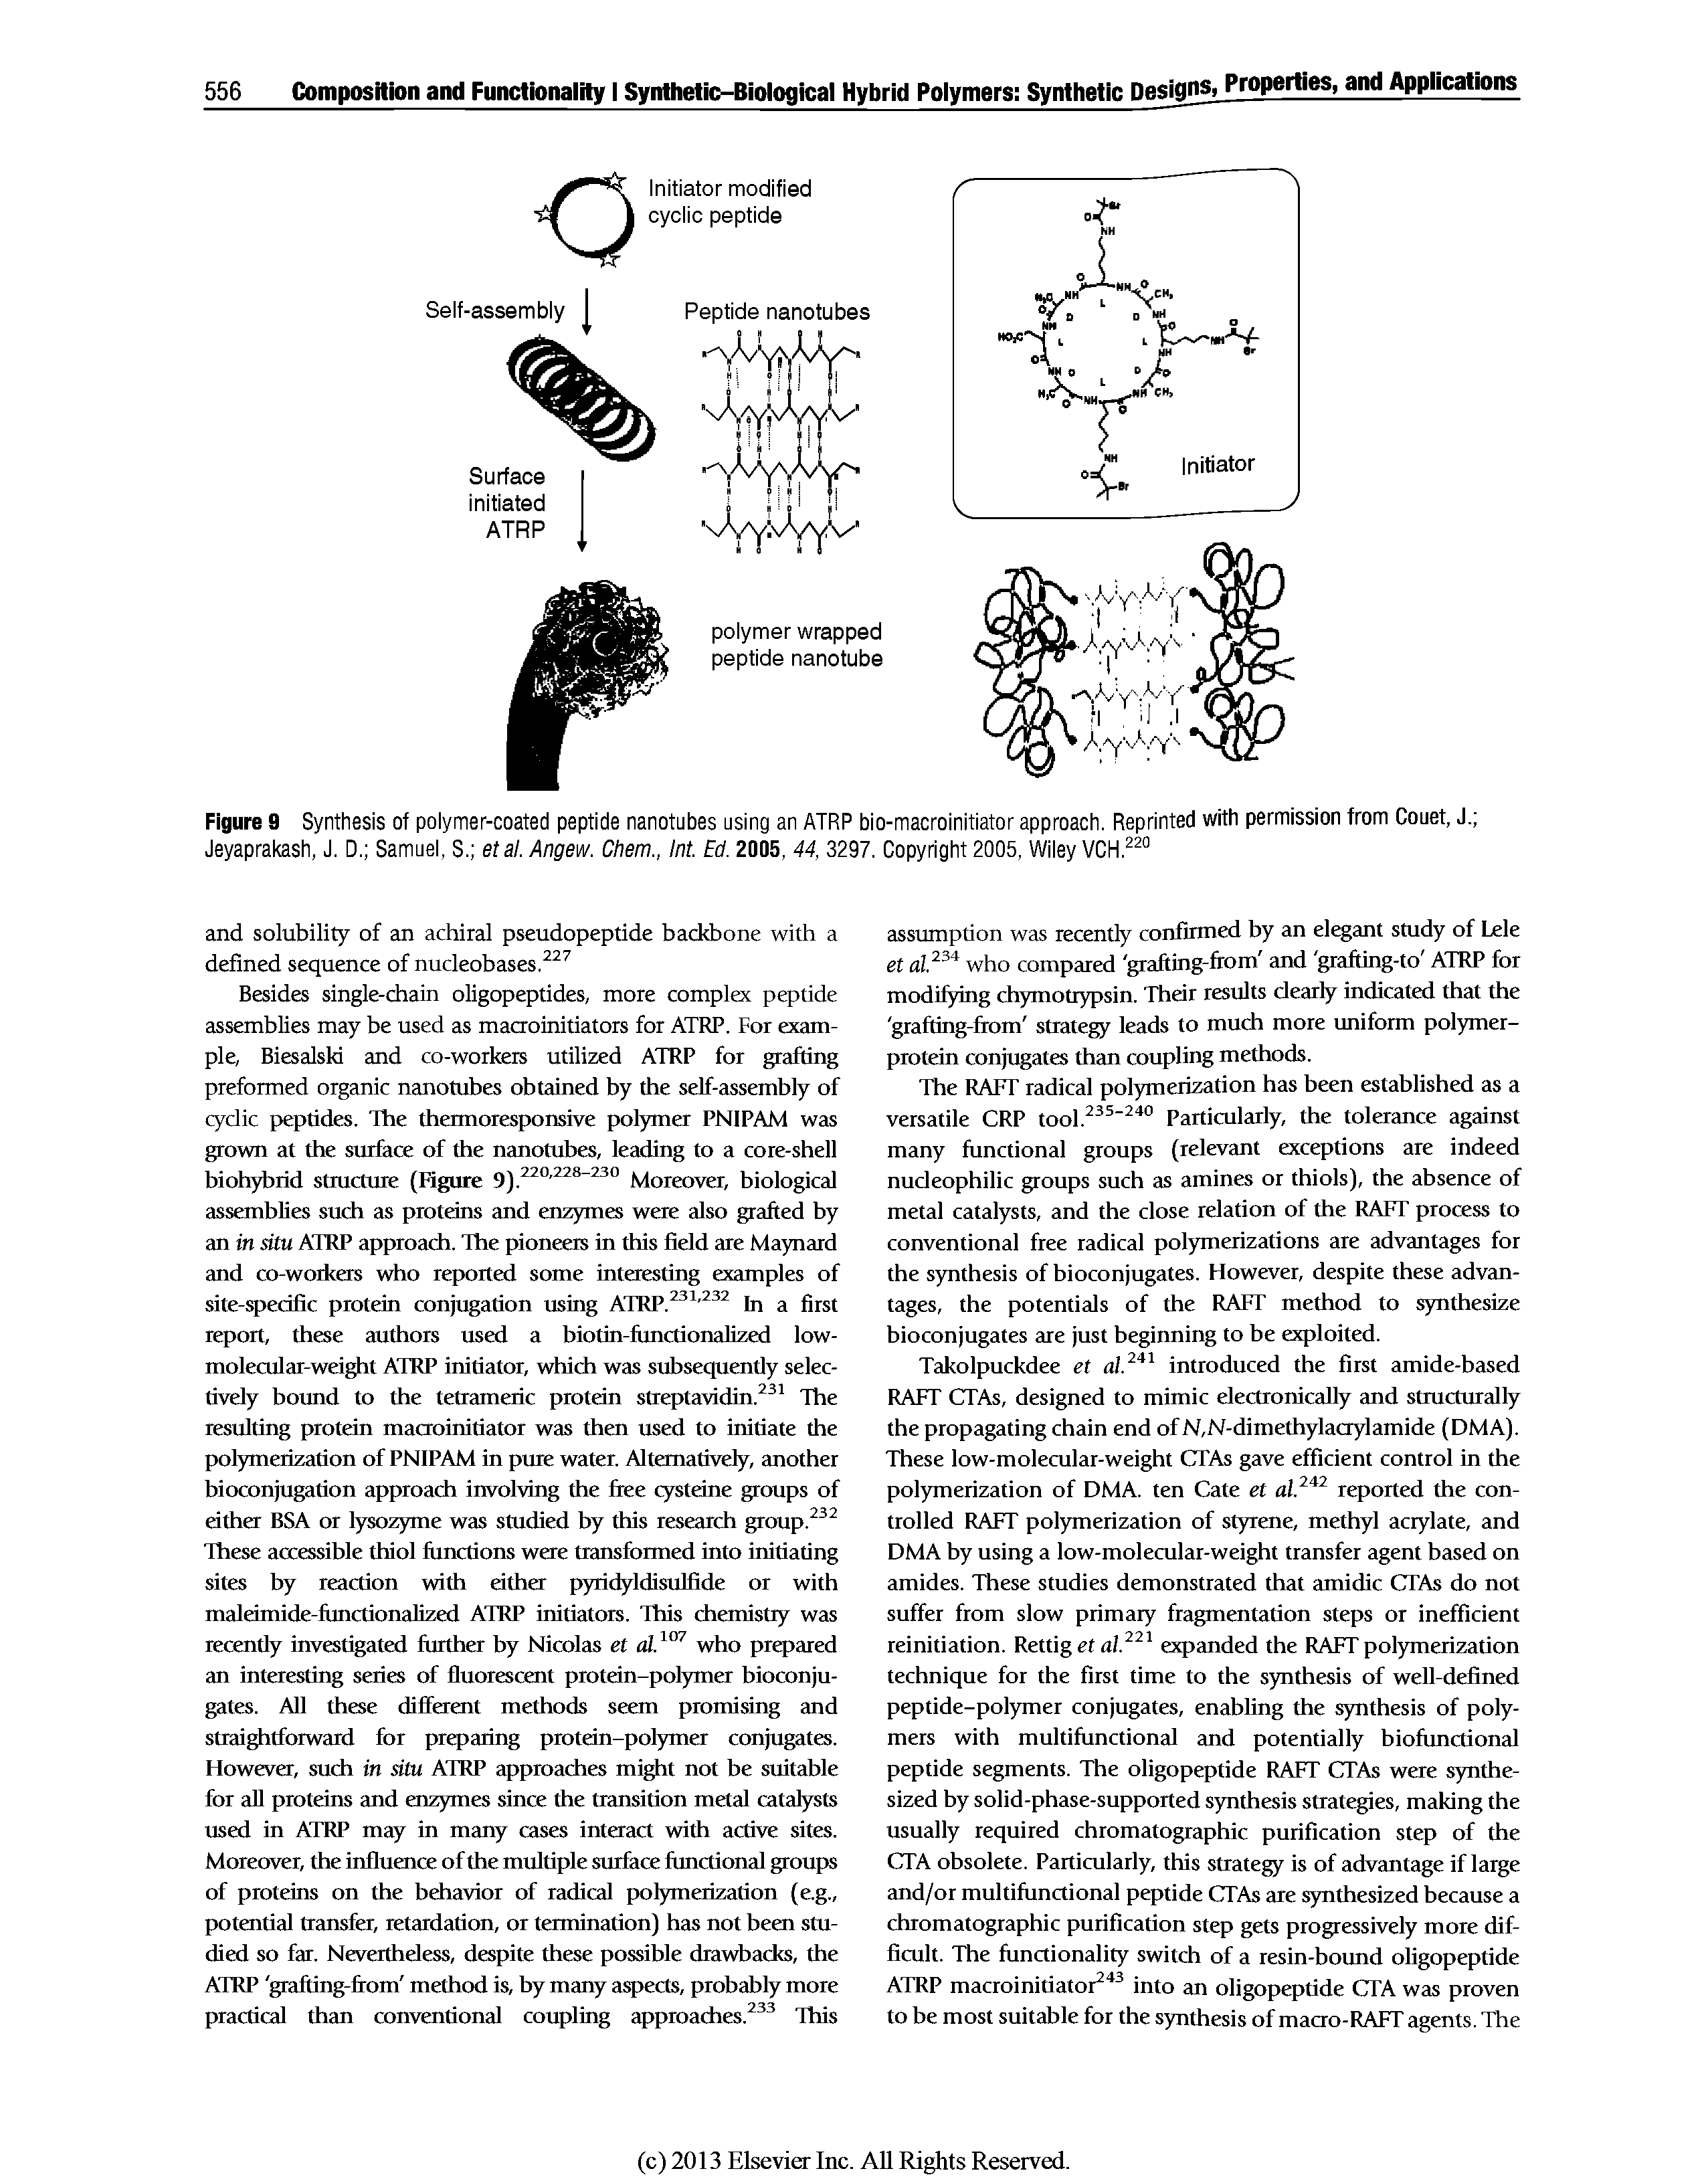 Figure 8 Synthesis of polymer-coated peptide nanotubes using an ATRP bio-macroinitiator approach. Reprinted with permission from Couet, J. Jeyaprakash, J. D. Samuel, S. etal. Angew. Chem., Int. Ed. 2005, 44, 3297. Copyright 2005, Wiley VCH. ...